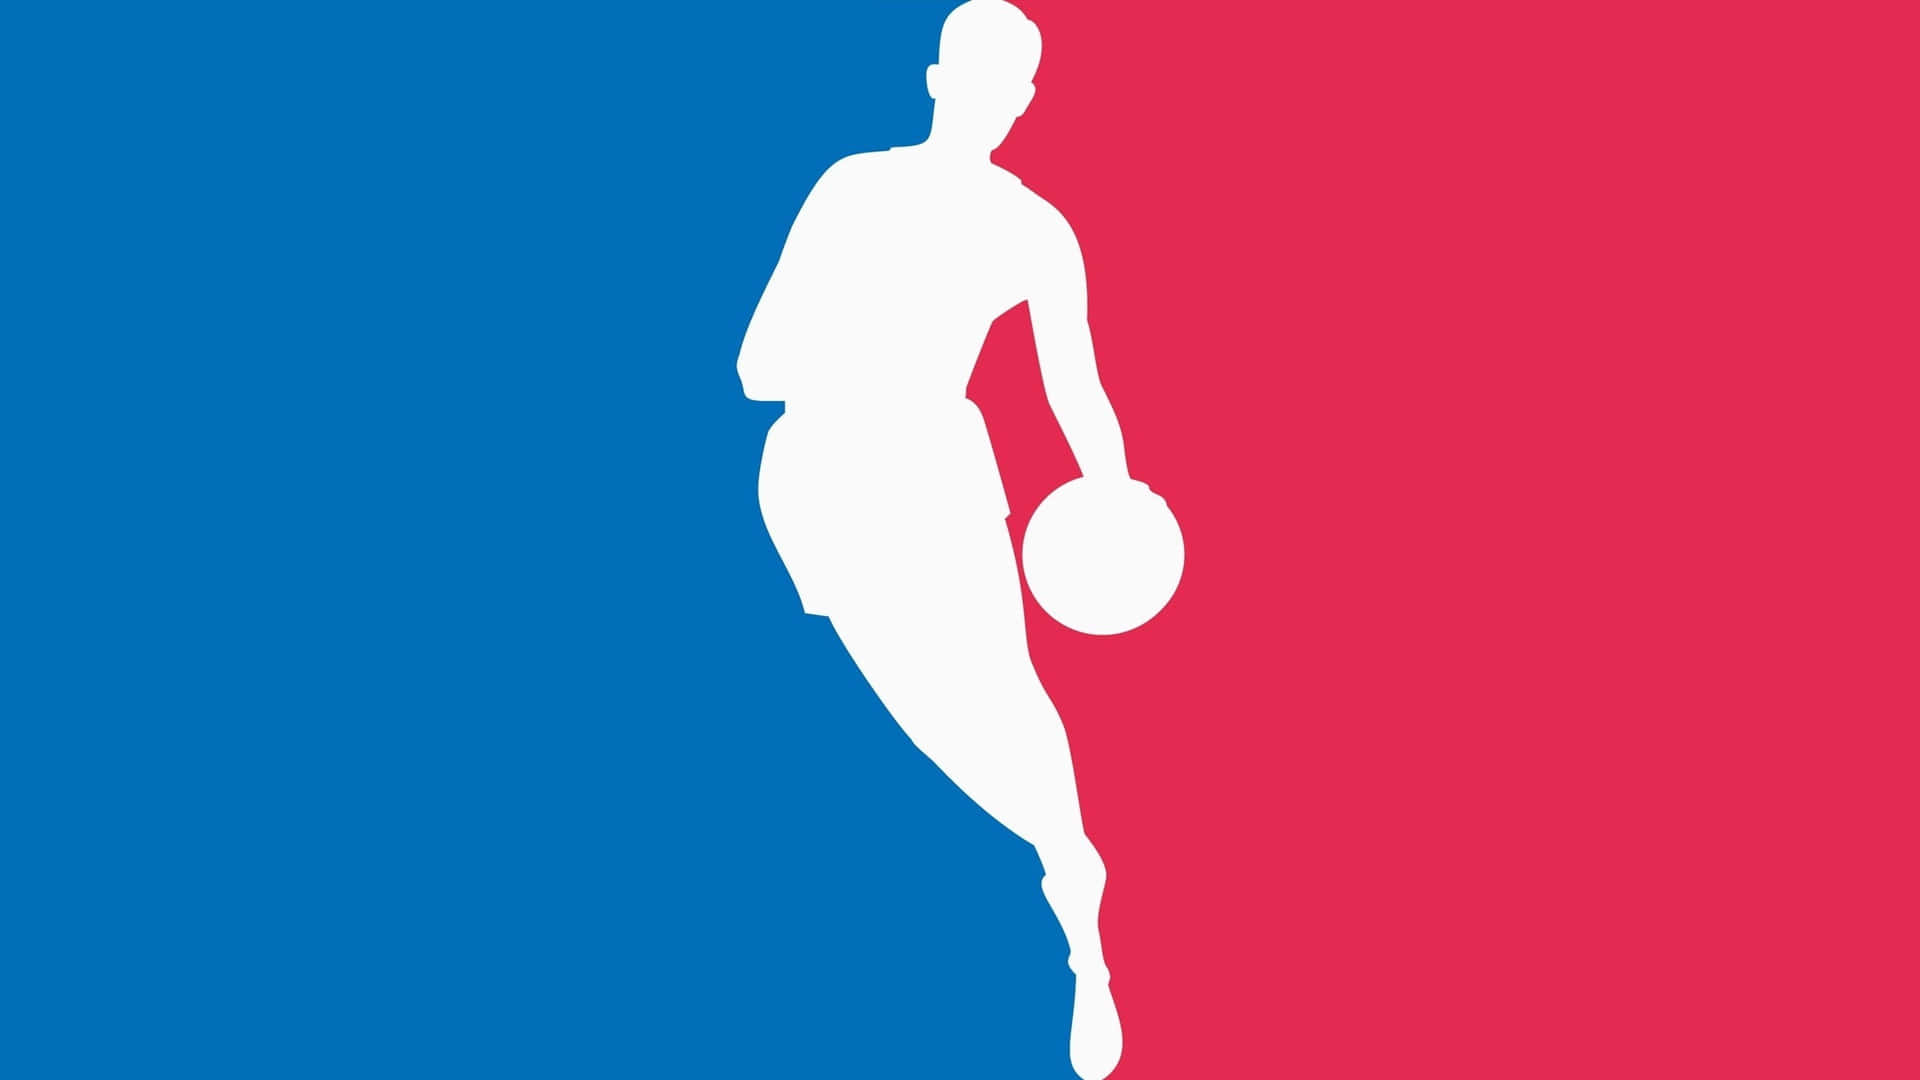 I made a few adjustments to the minimalist NBA logos wallpaper made by  uDyoon19452 a few months ago  rnba